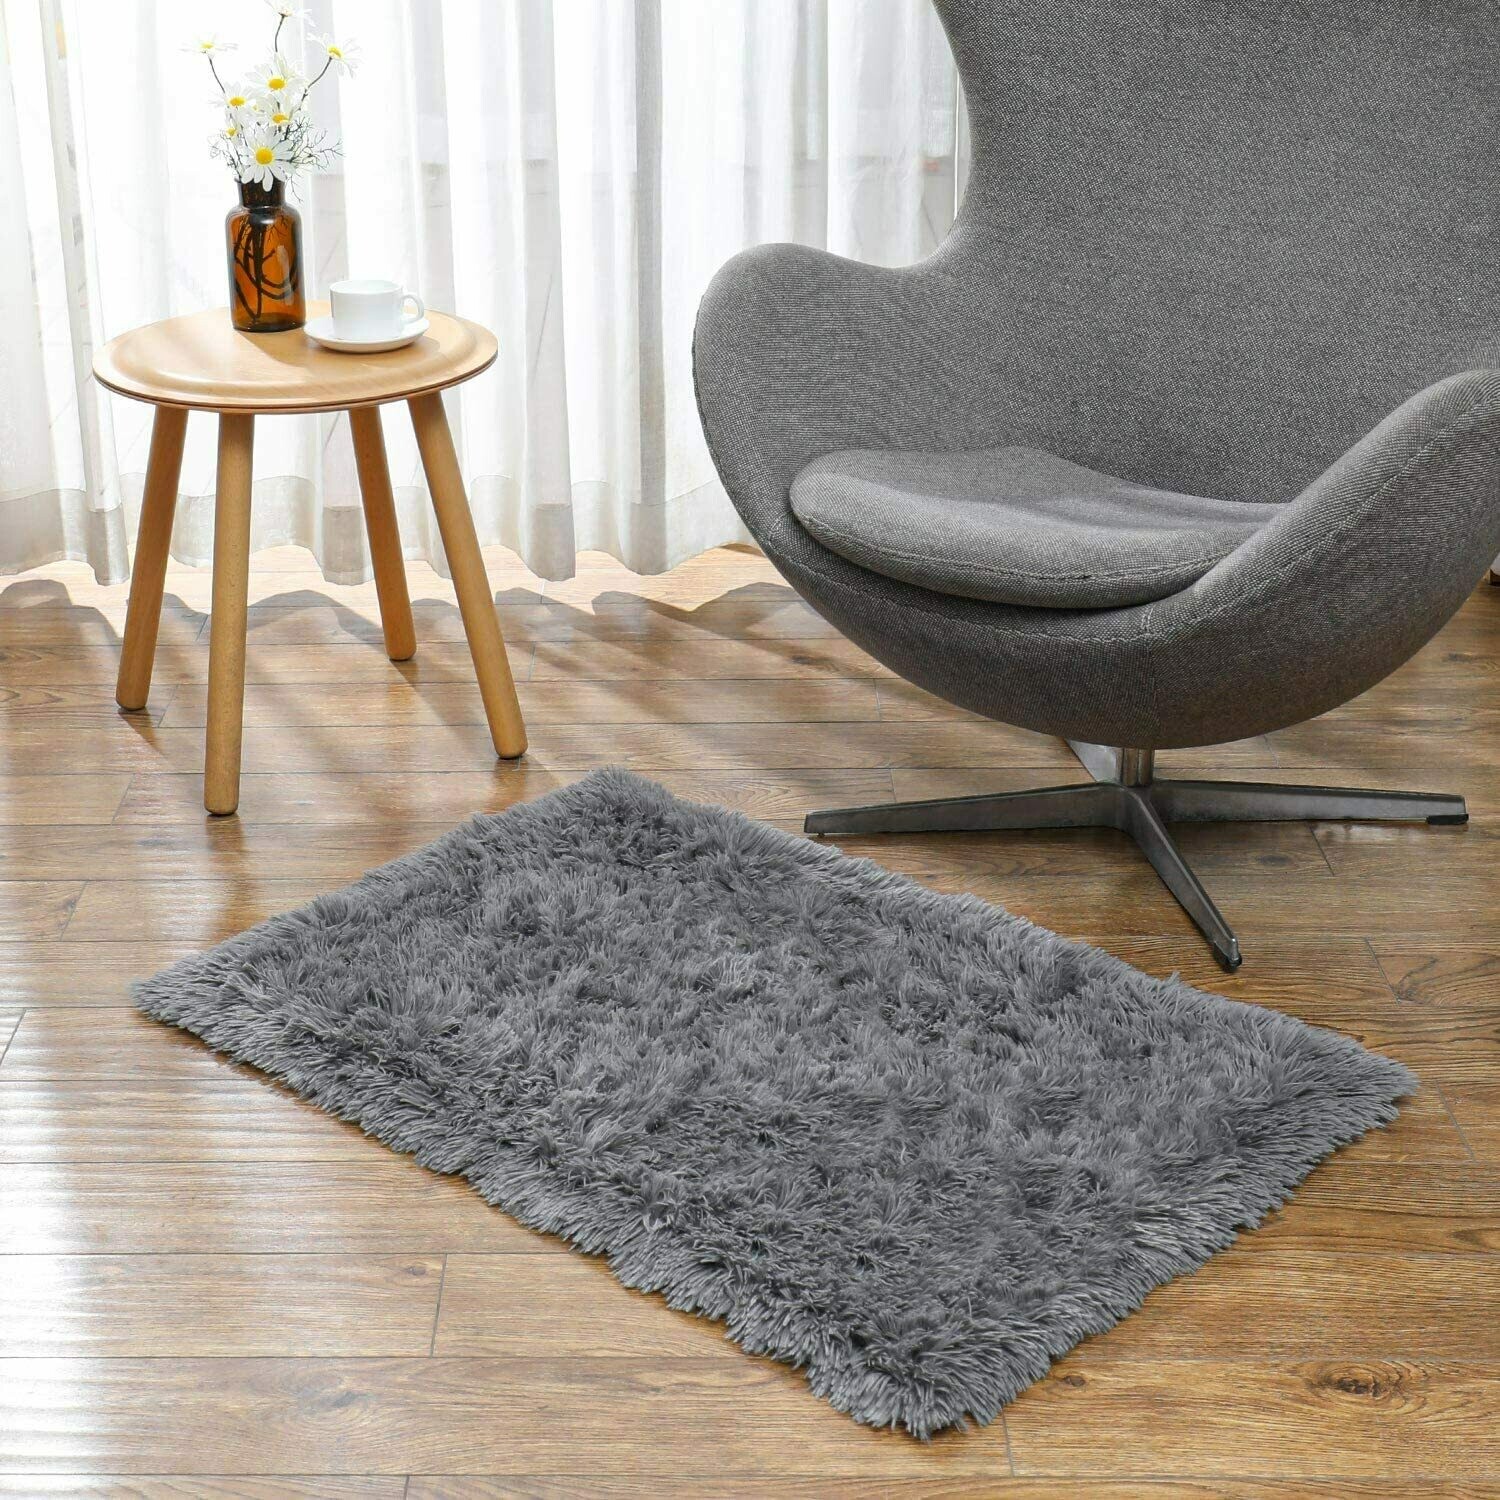 Machine Washable Fluffy Area Rugs for Bedroom, Ultra-Luxurious Soft and Thick Faux Fur Shag Rug Non-Slip Carpet for Kids Baby Room, Nursery Modern Decor Rug, 2x3 Feet Grey